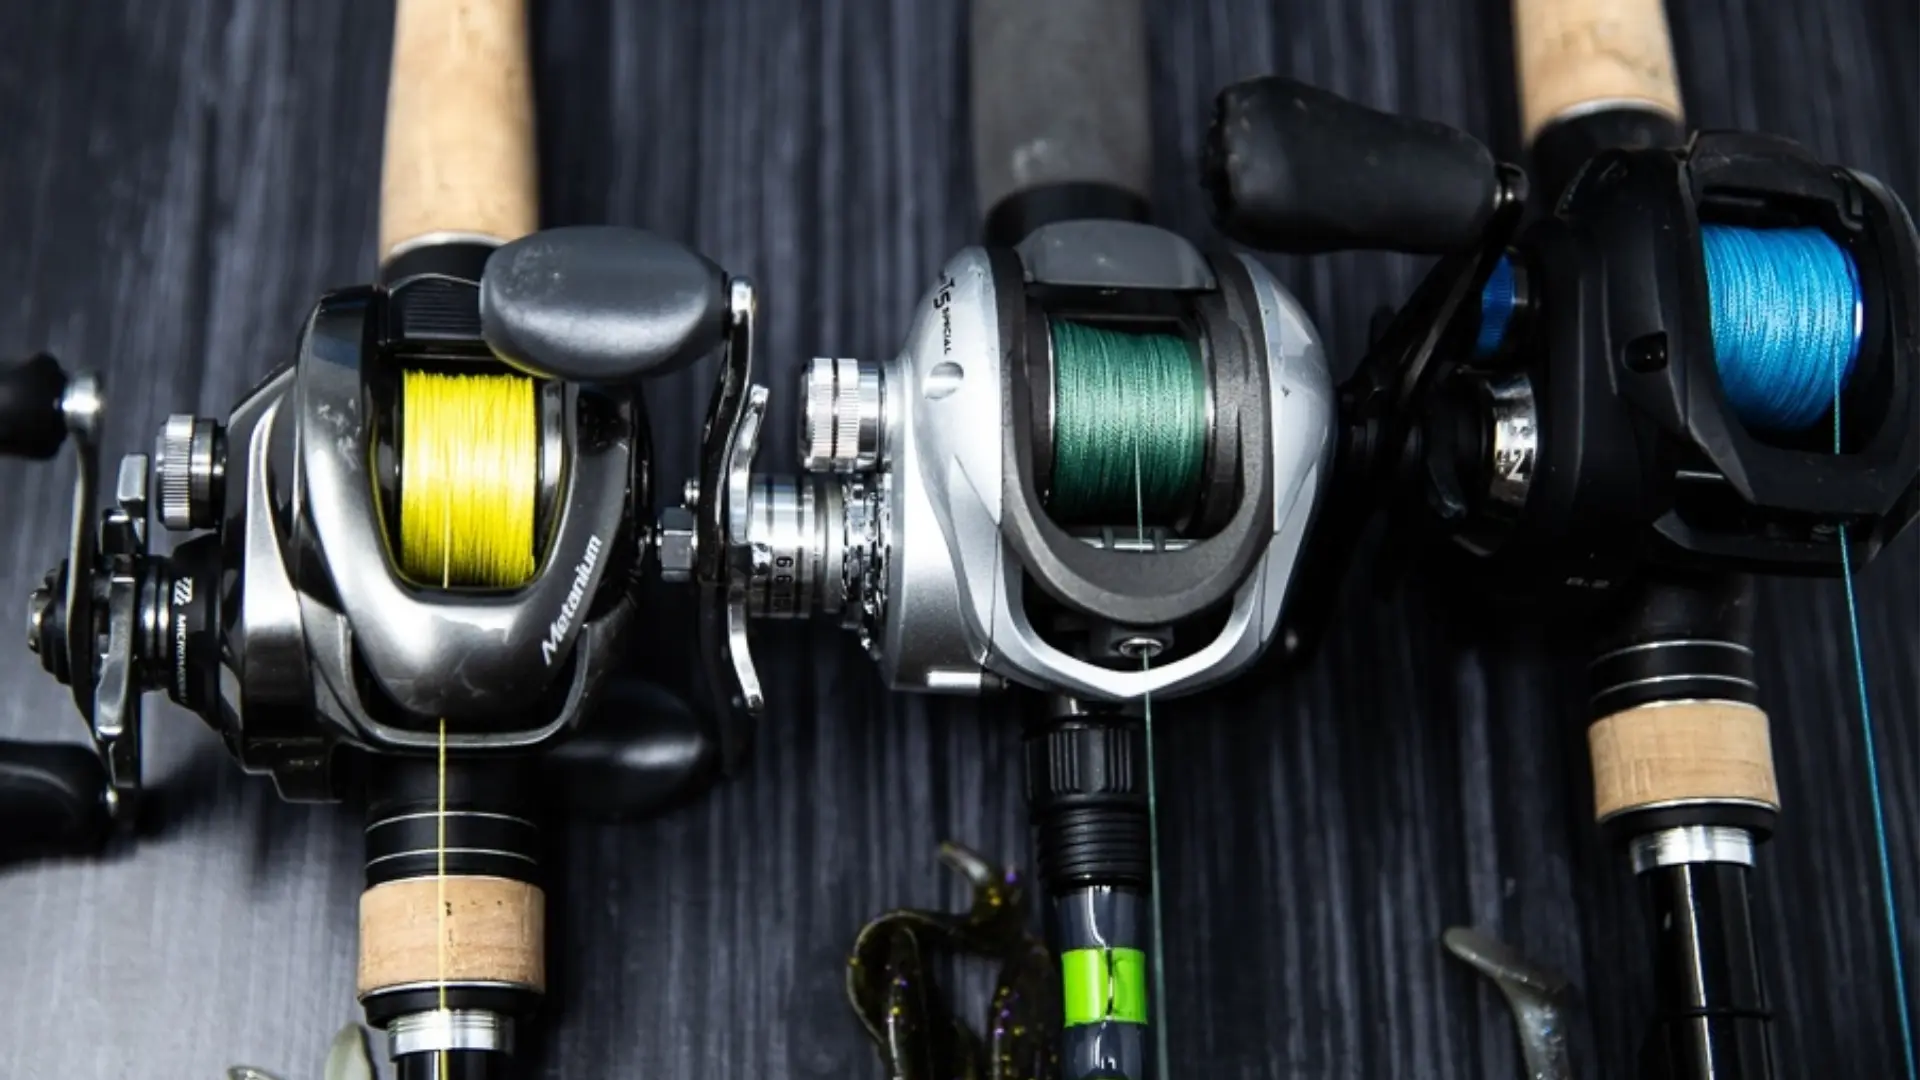 How to pick the best fishing reel for yourself out of these 3 types